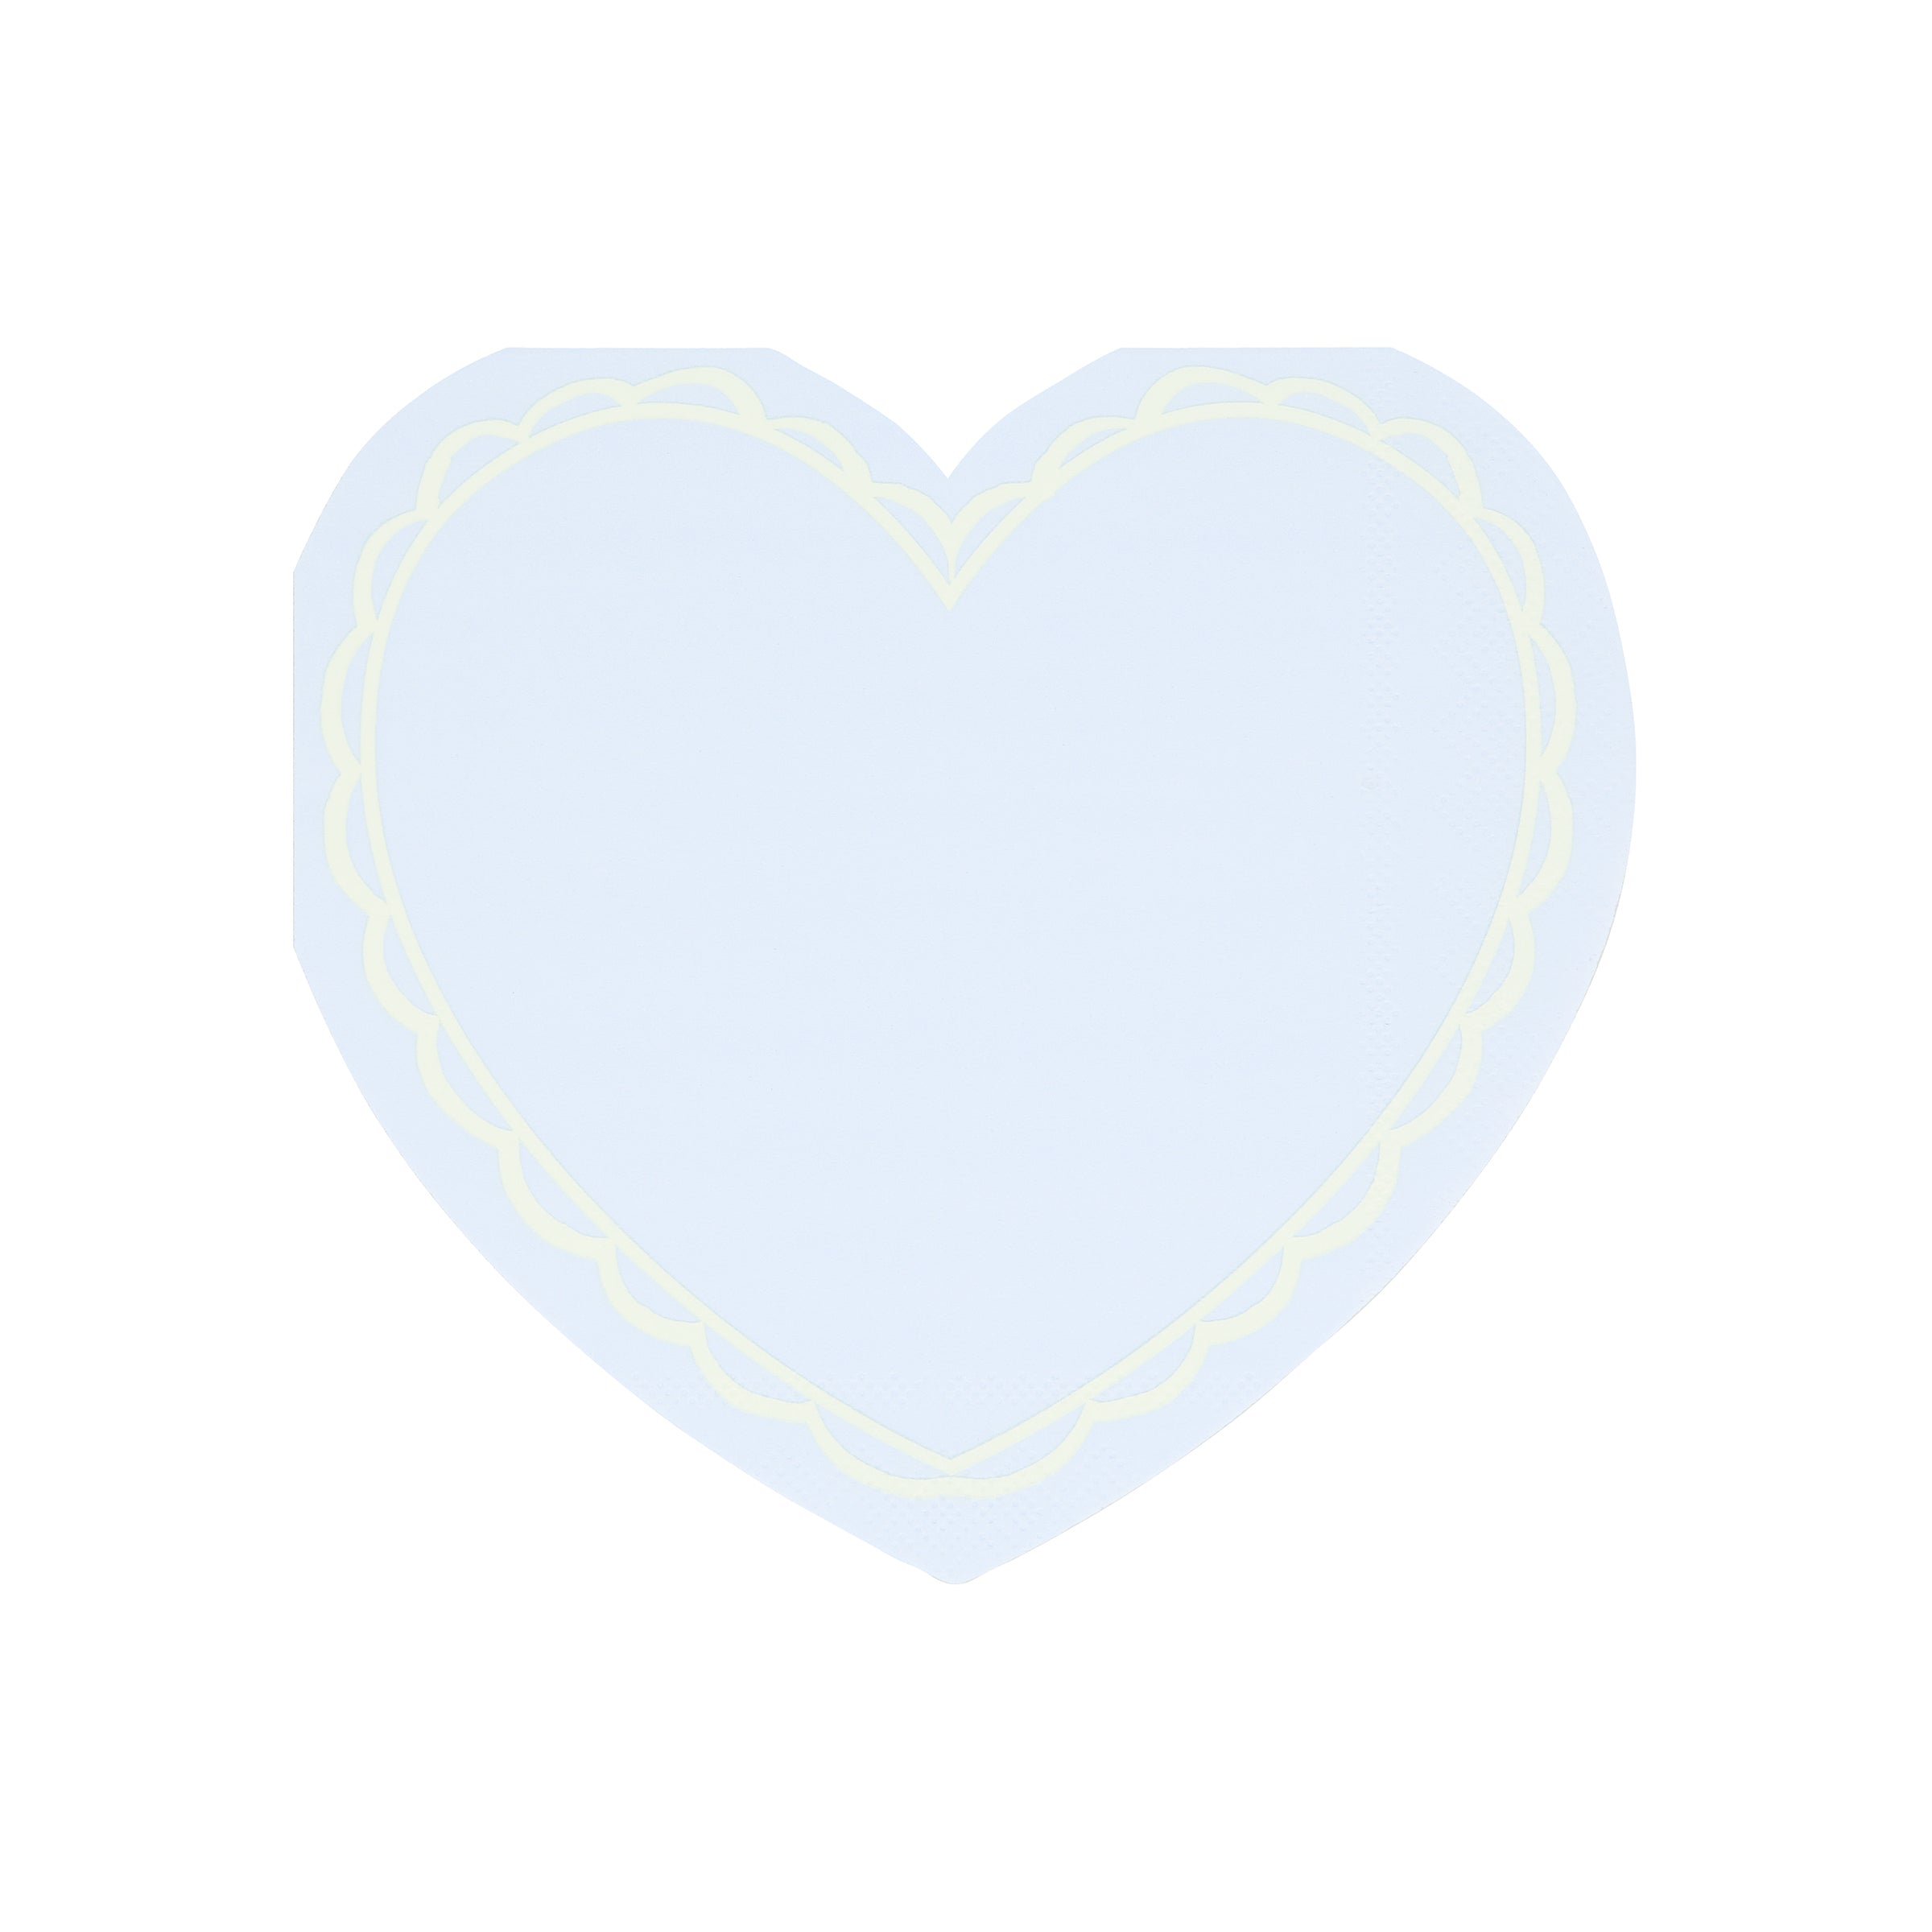 Our party napkins, heart-shaped and with 8 pastel colors, are perfect for a Valentines meal.